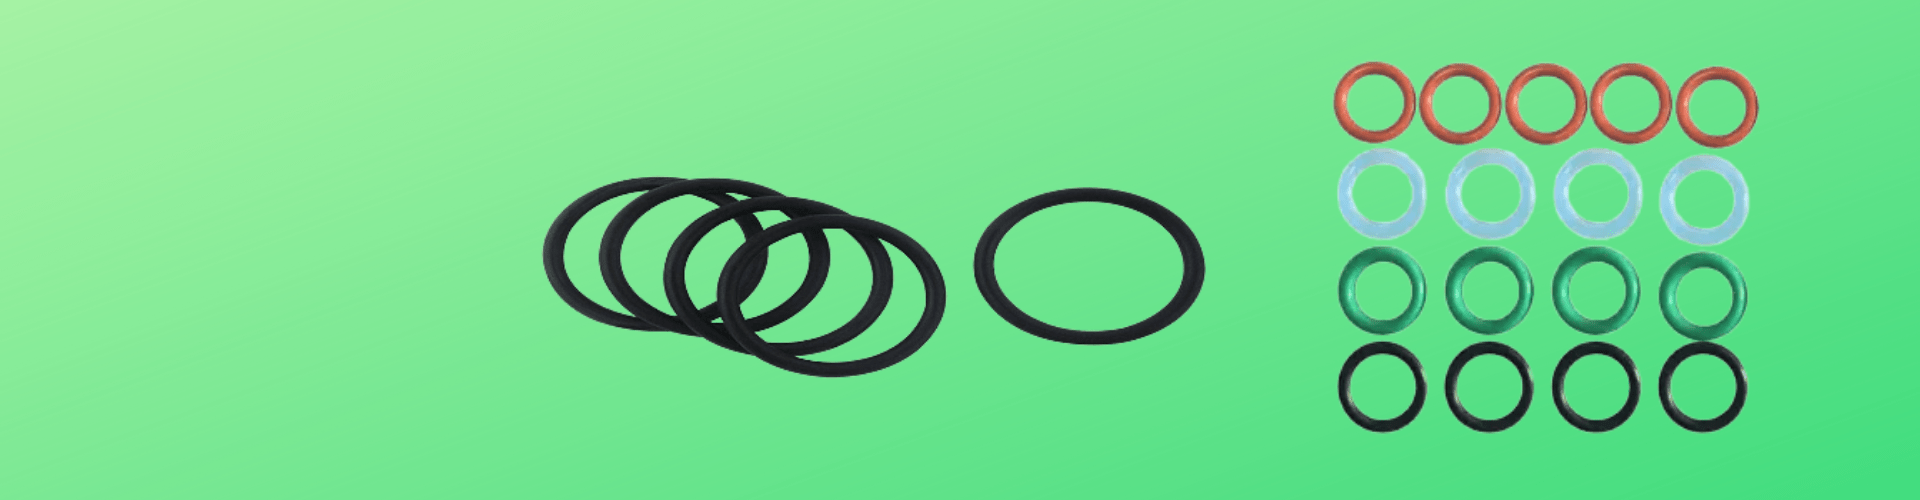 Rubber o ring